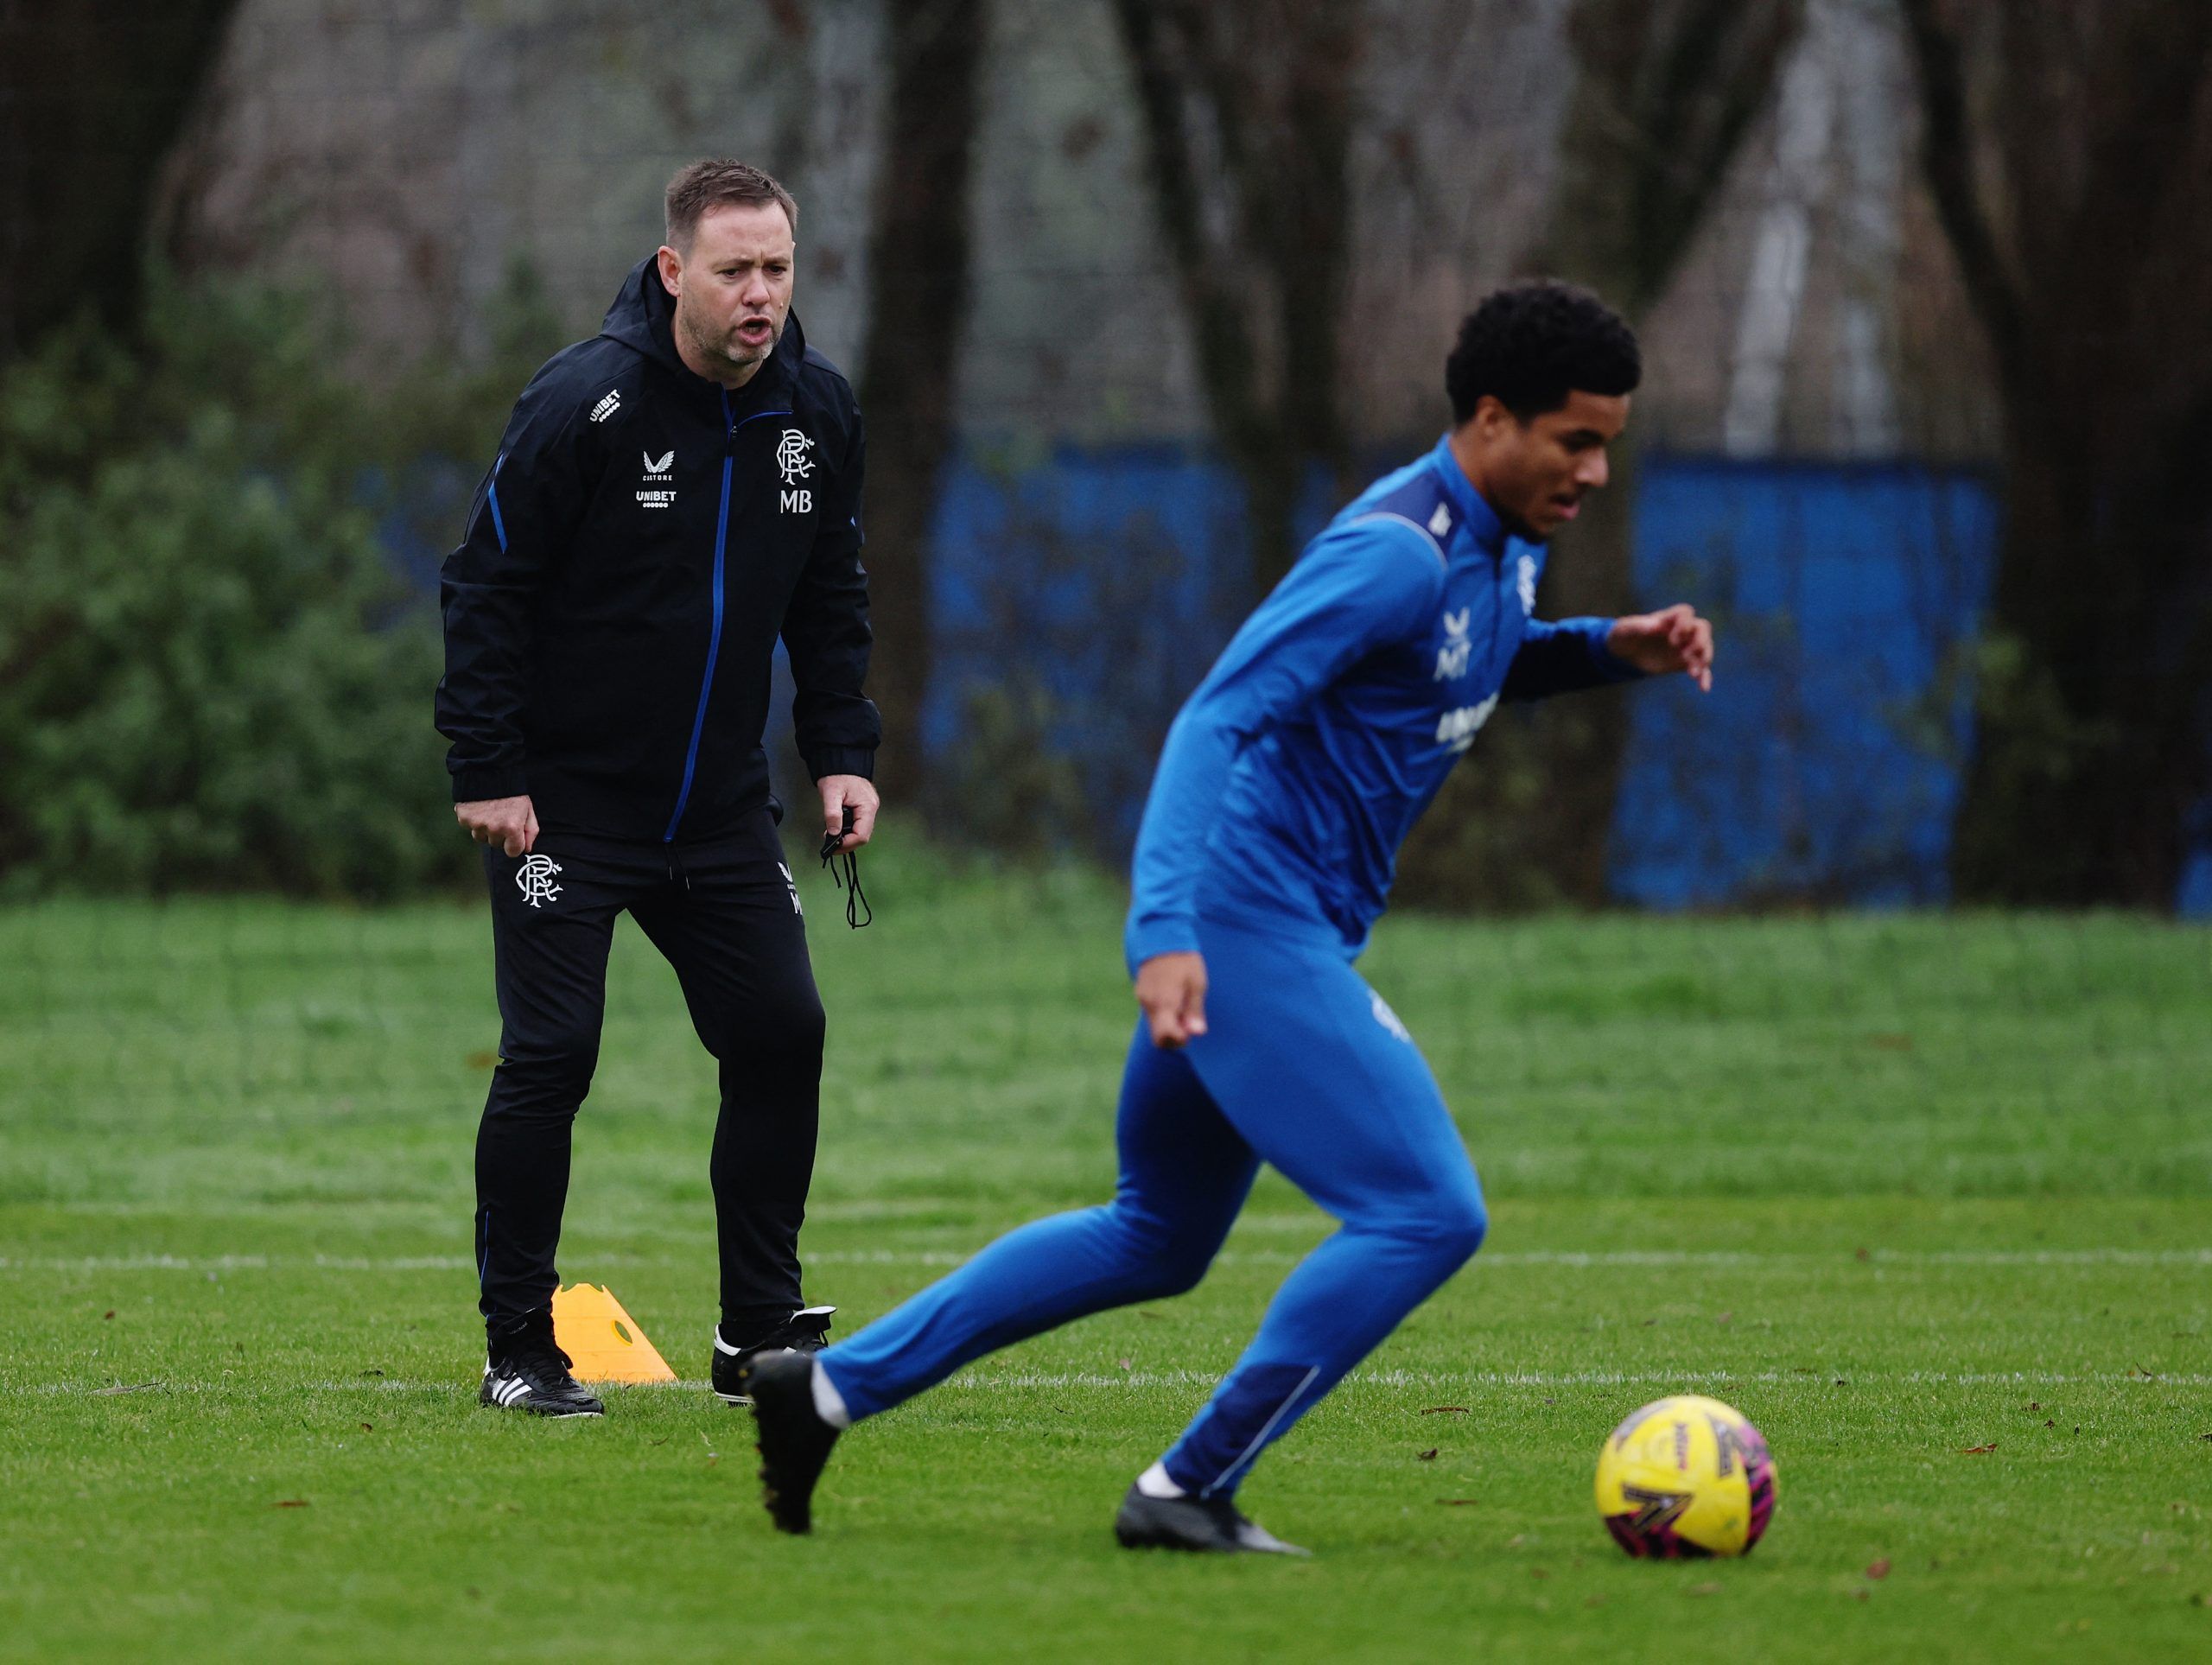 Soccer Football - Rangers Training with new manager Michael Beale - The Hummel Training Centre, Glasgow, Scotland, Britain - December 1, 2022 Newly appointed Rangers manager Michael Beale and Malik Tillman during training REUTERS/Russell Cheyne